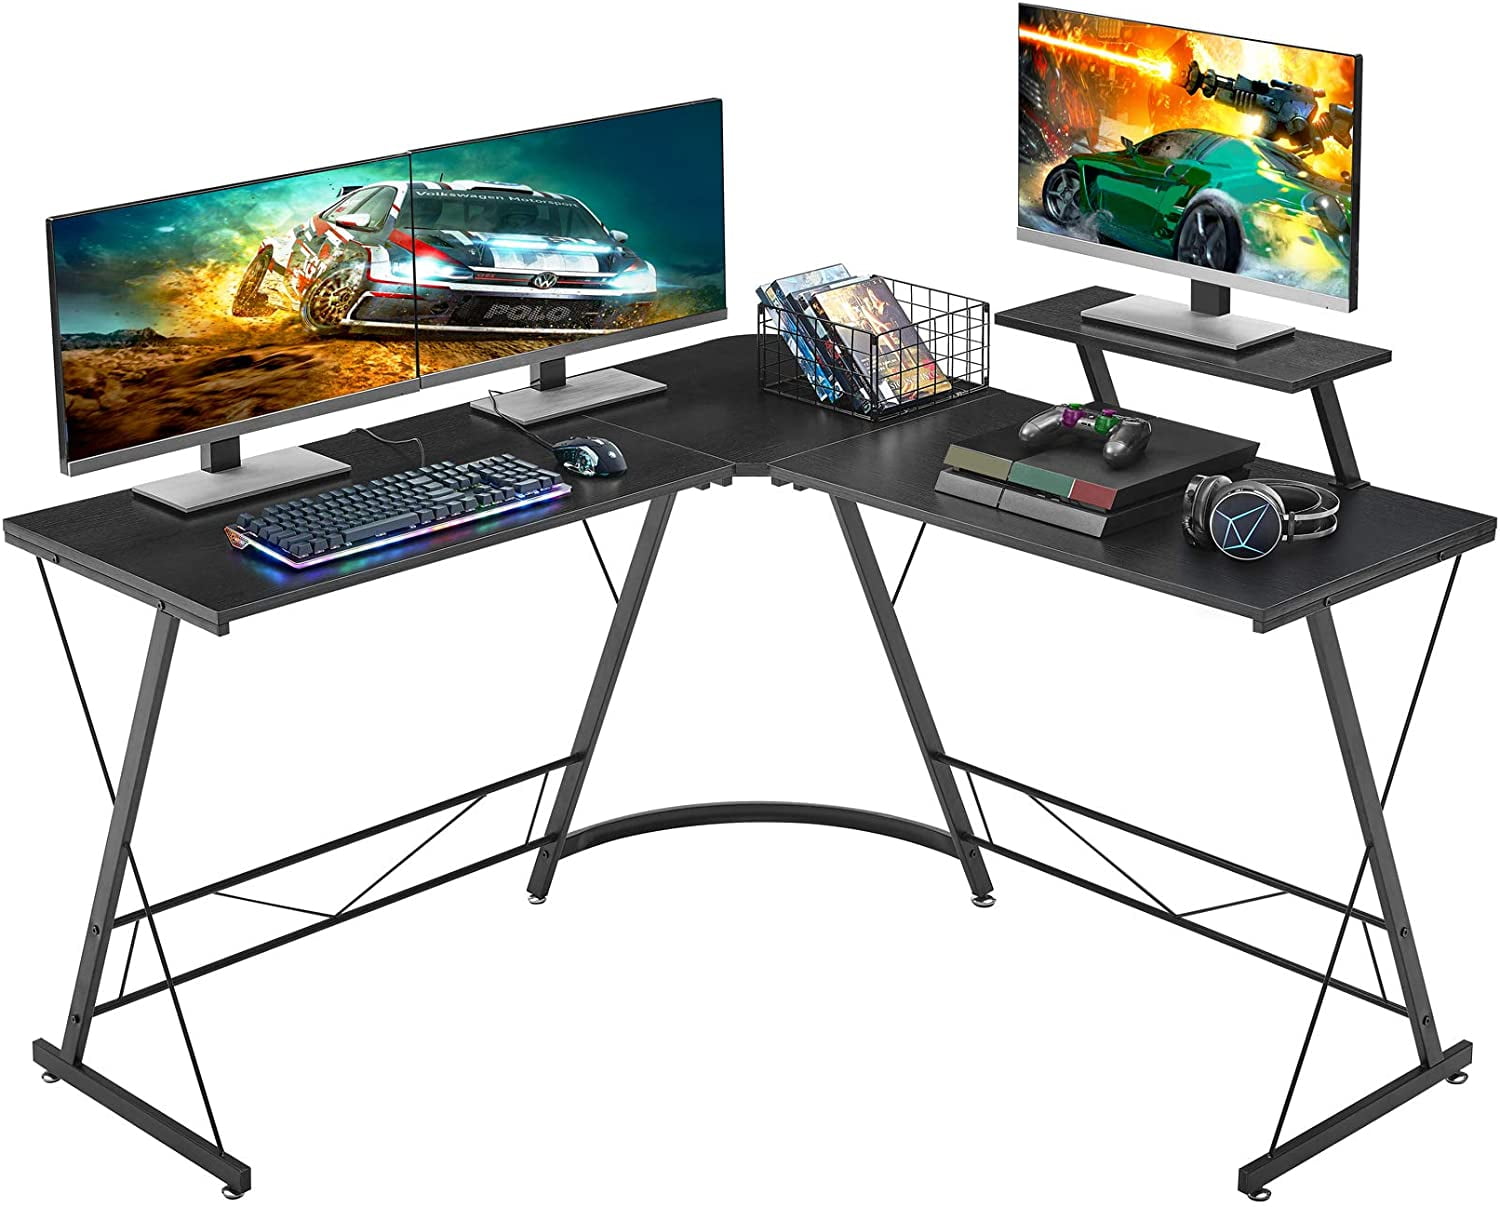 Details about   L Shaped Gaming Desk with Monitor Stand & 2 USB Ports 44x19 39x19 Sides Walnut H 